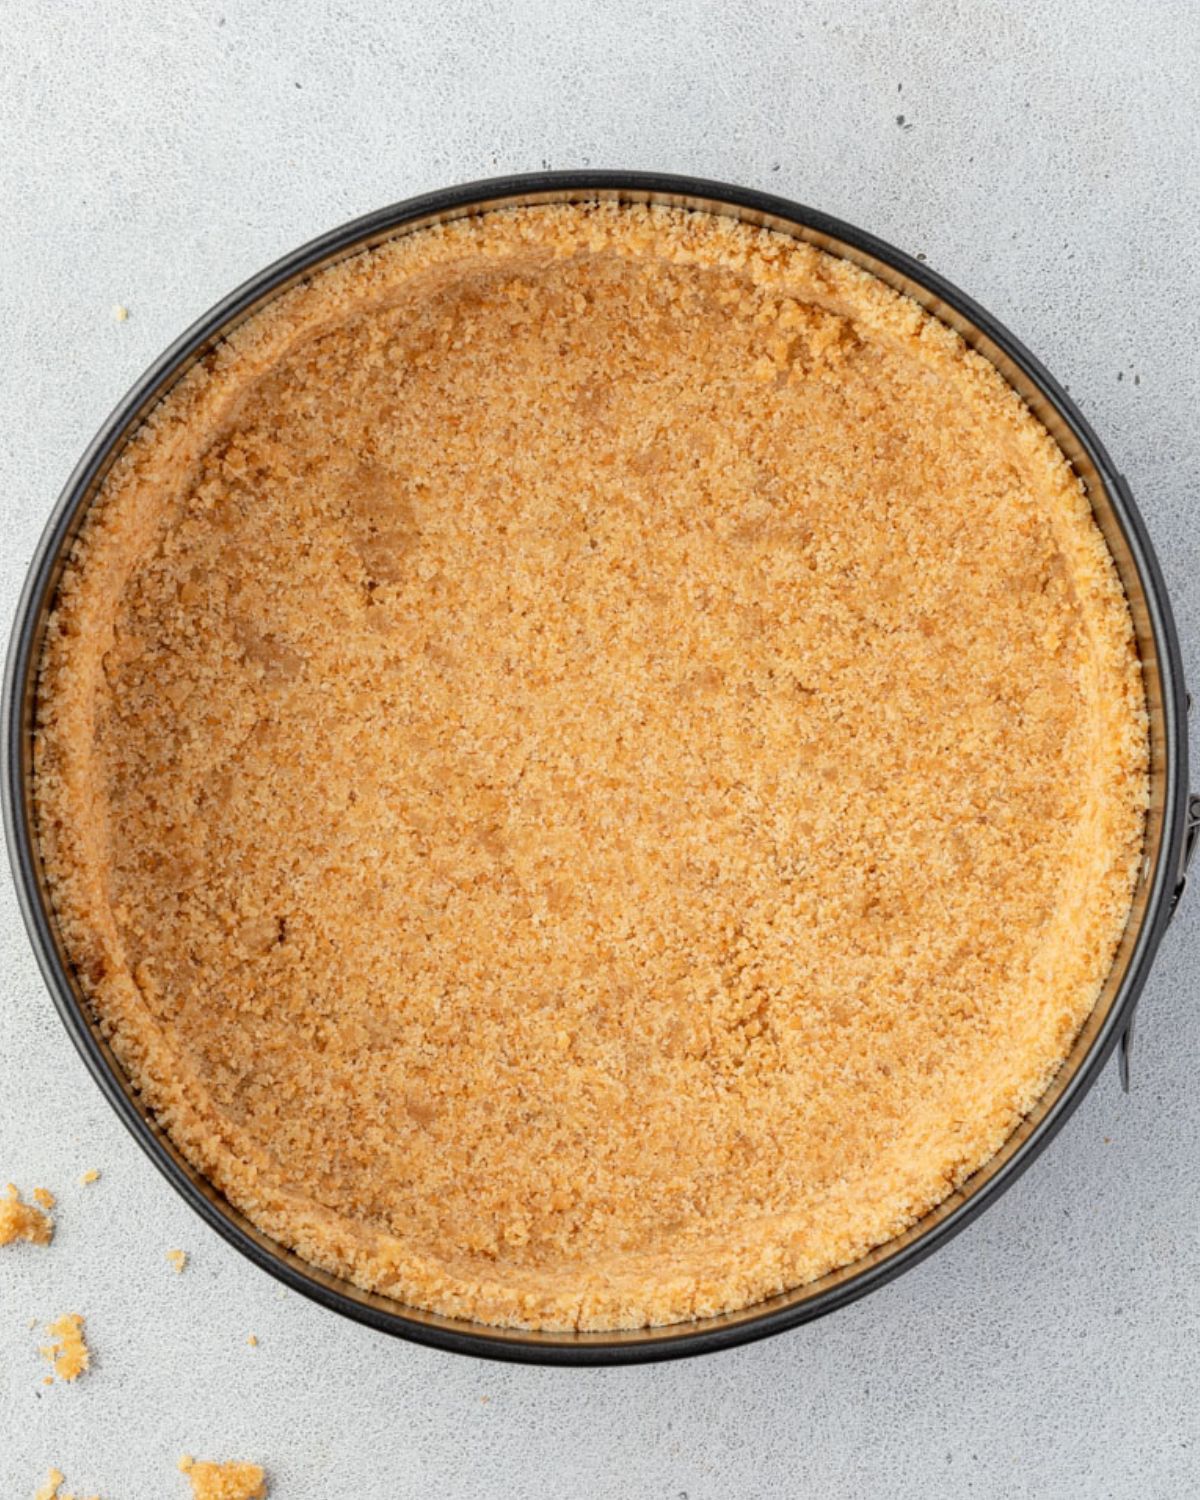 Cheesecake crust with cookie crumbs scattered.